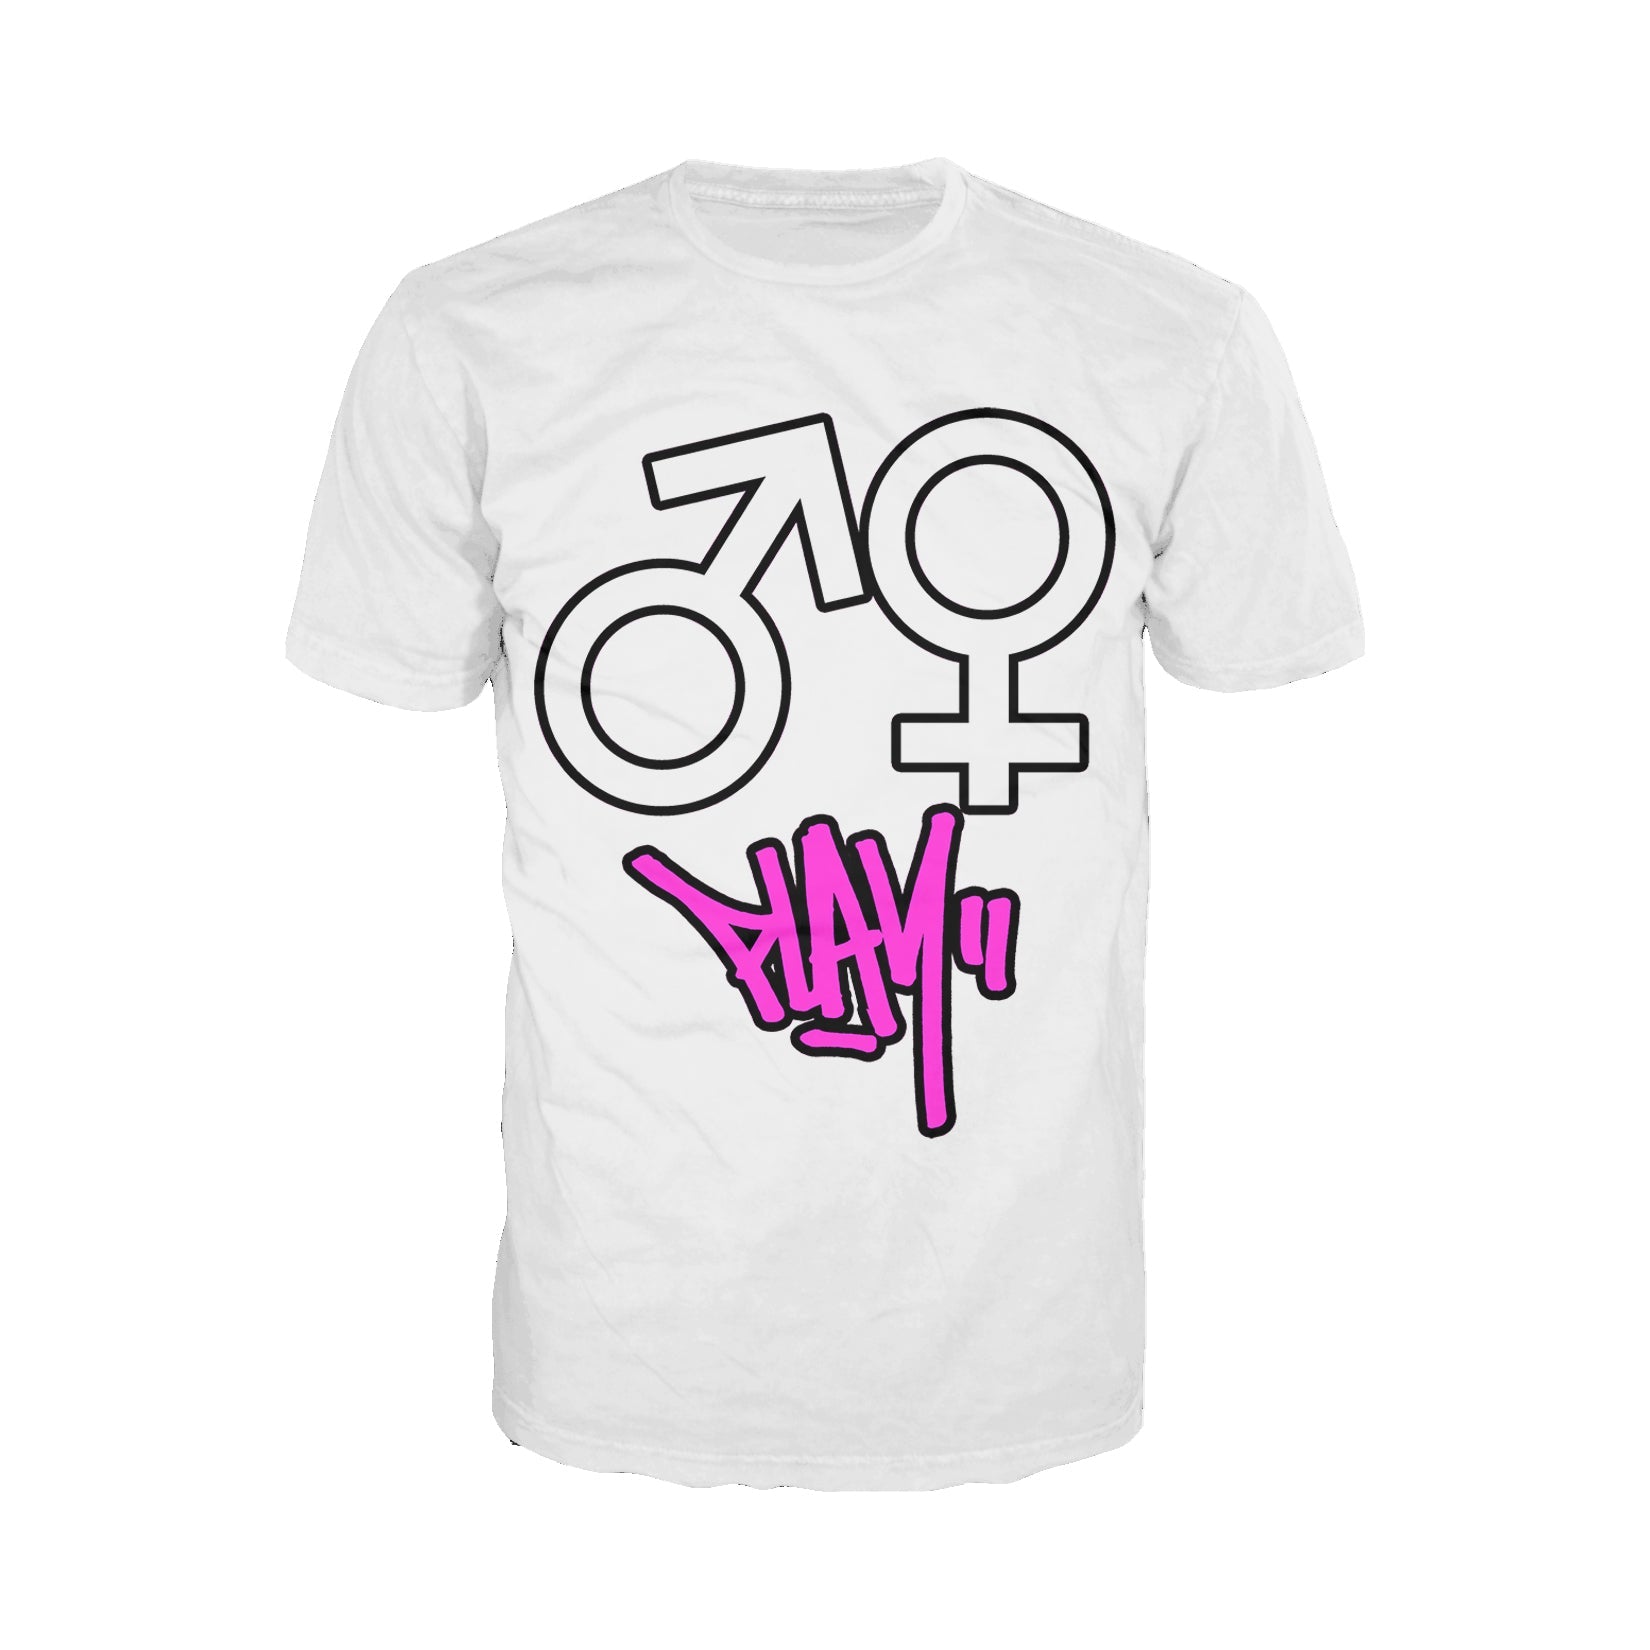 US Brand X Old's Kool Play Official Men's T-Shirt ()